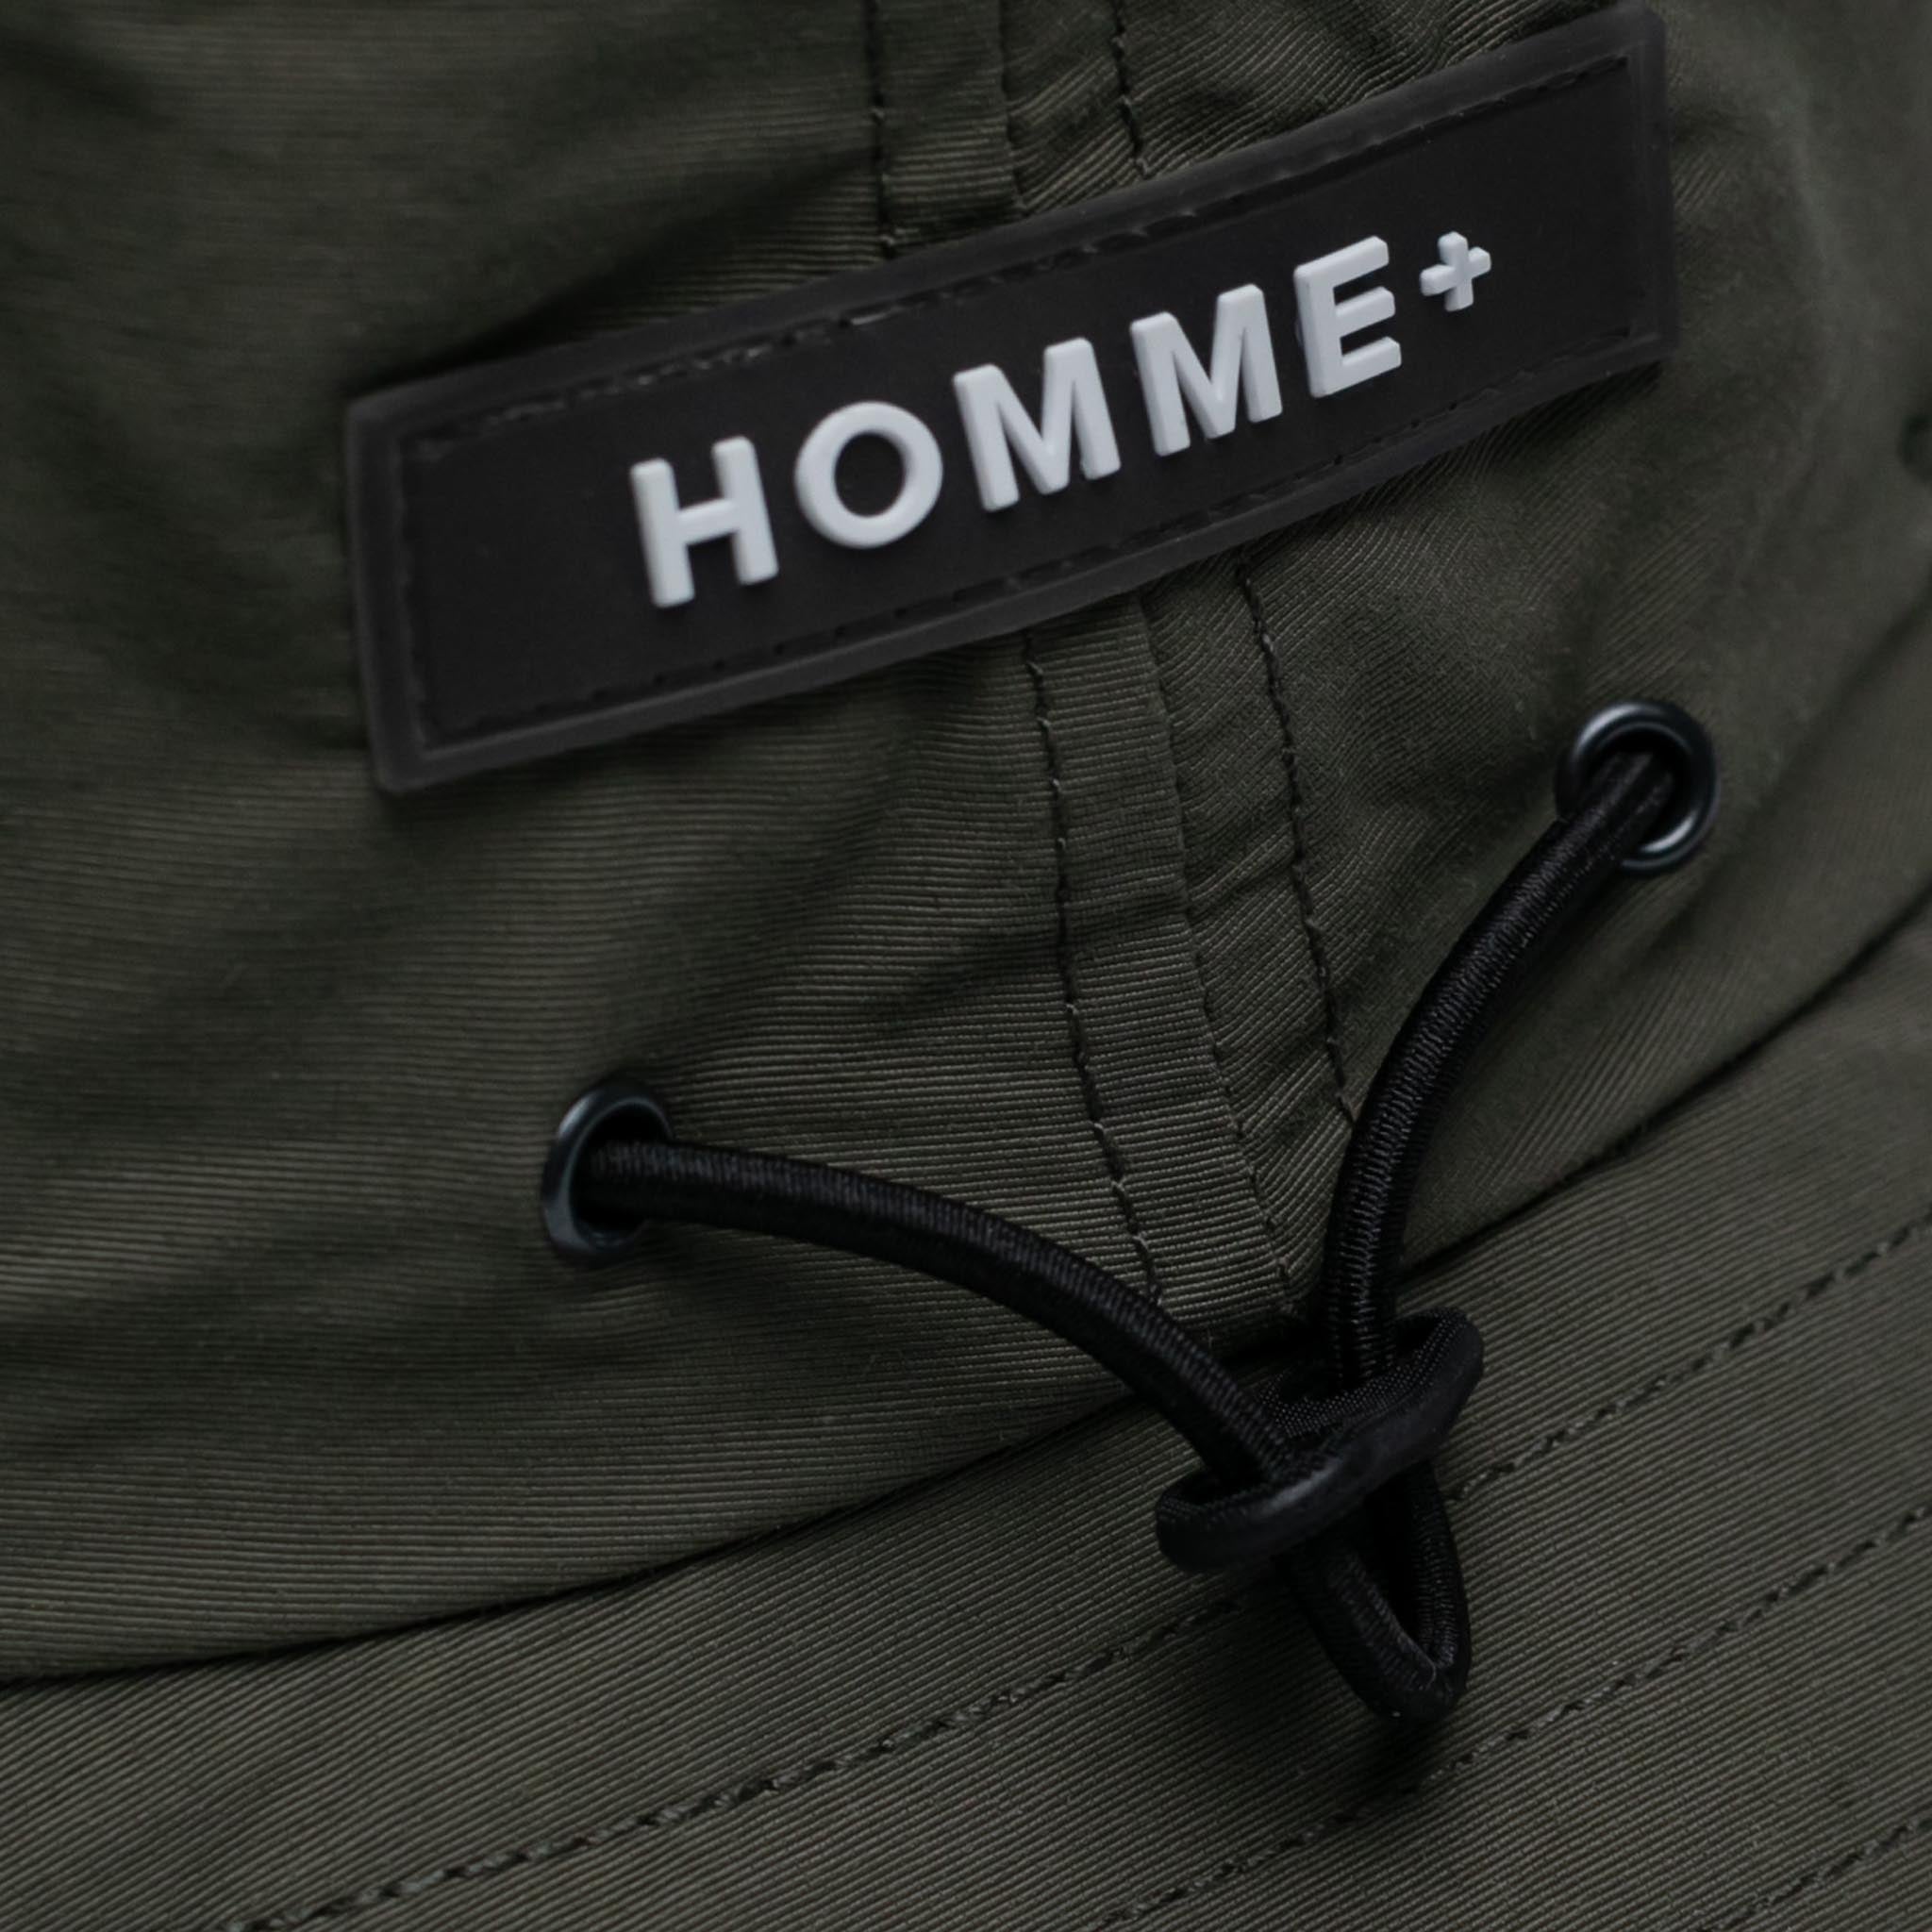 HOMME+ ESSENTIAL by Homme Bucket Hat Army